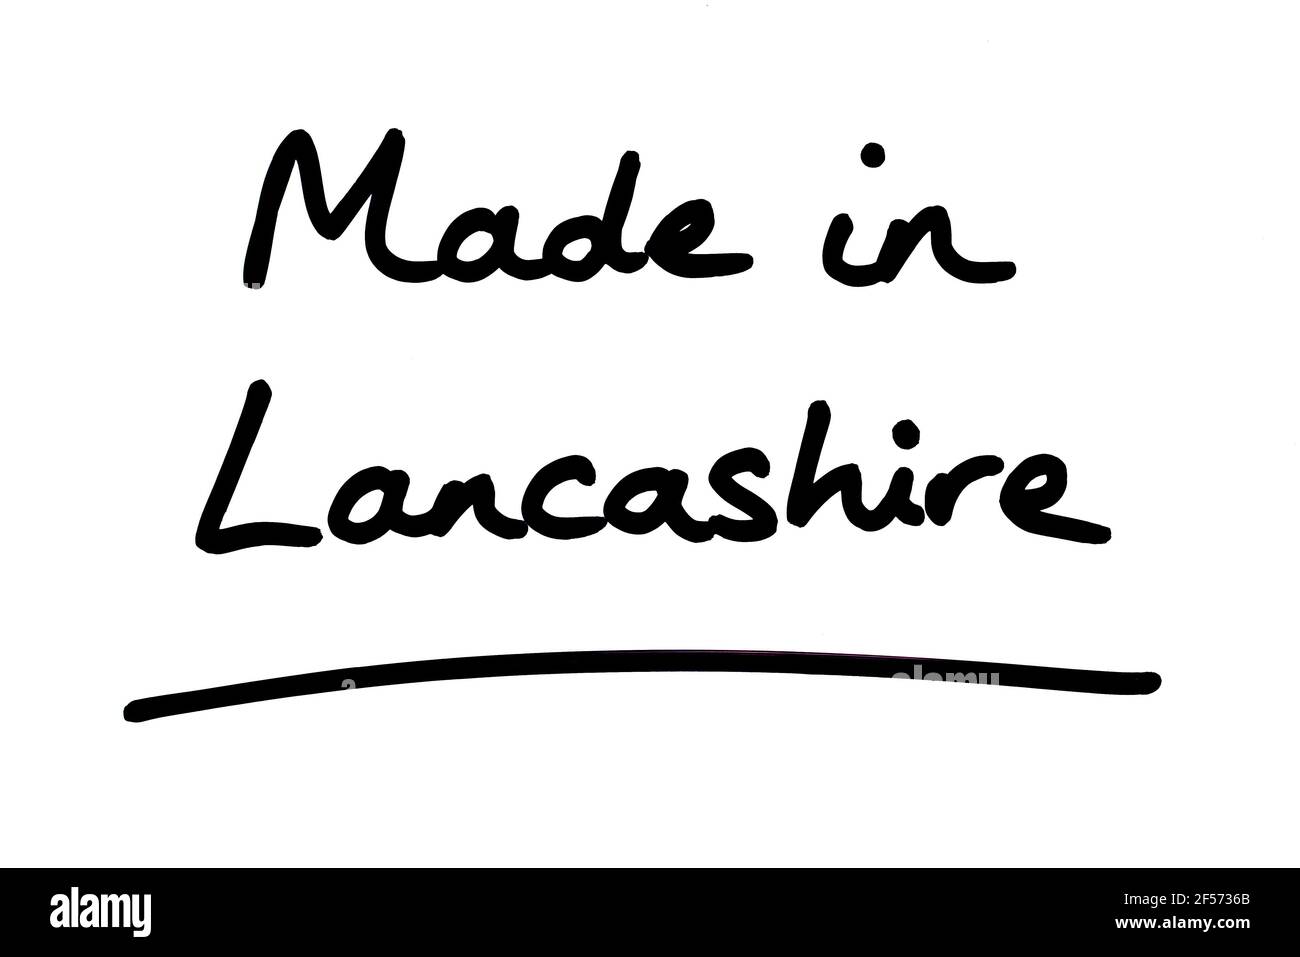 Made in Lancashire, handwritten on a white background. Stock Photo